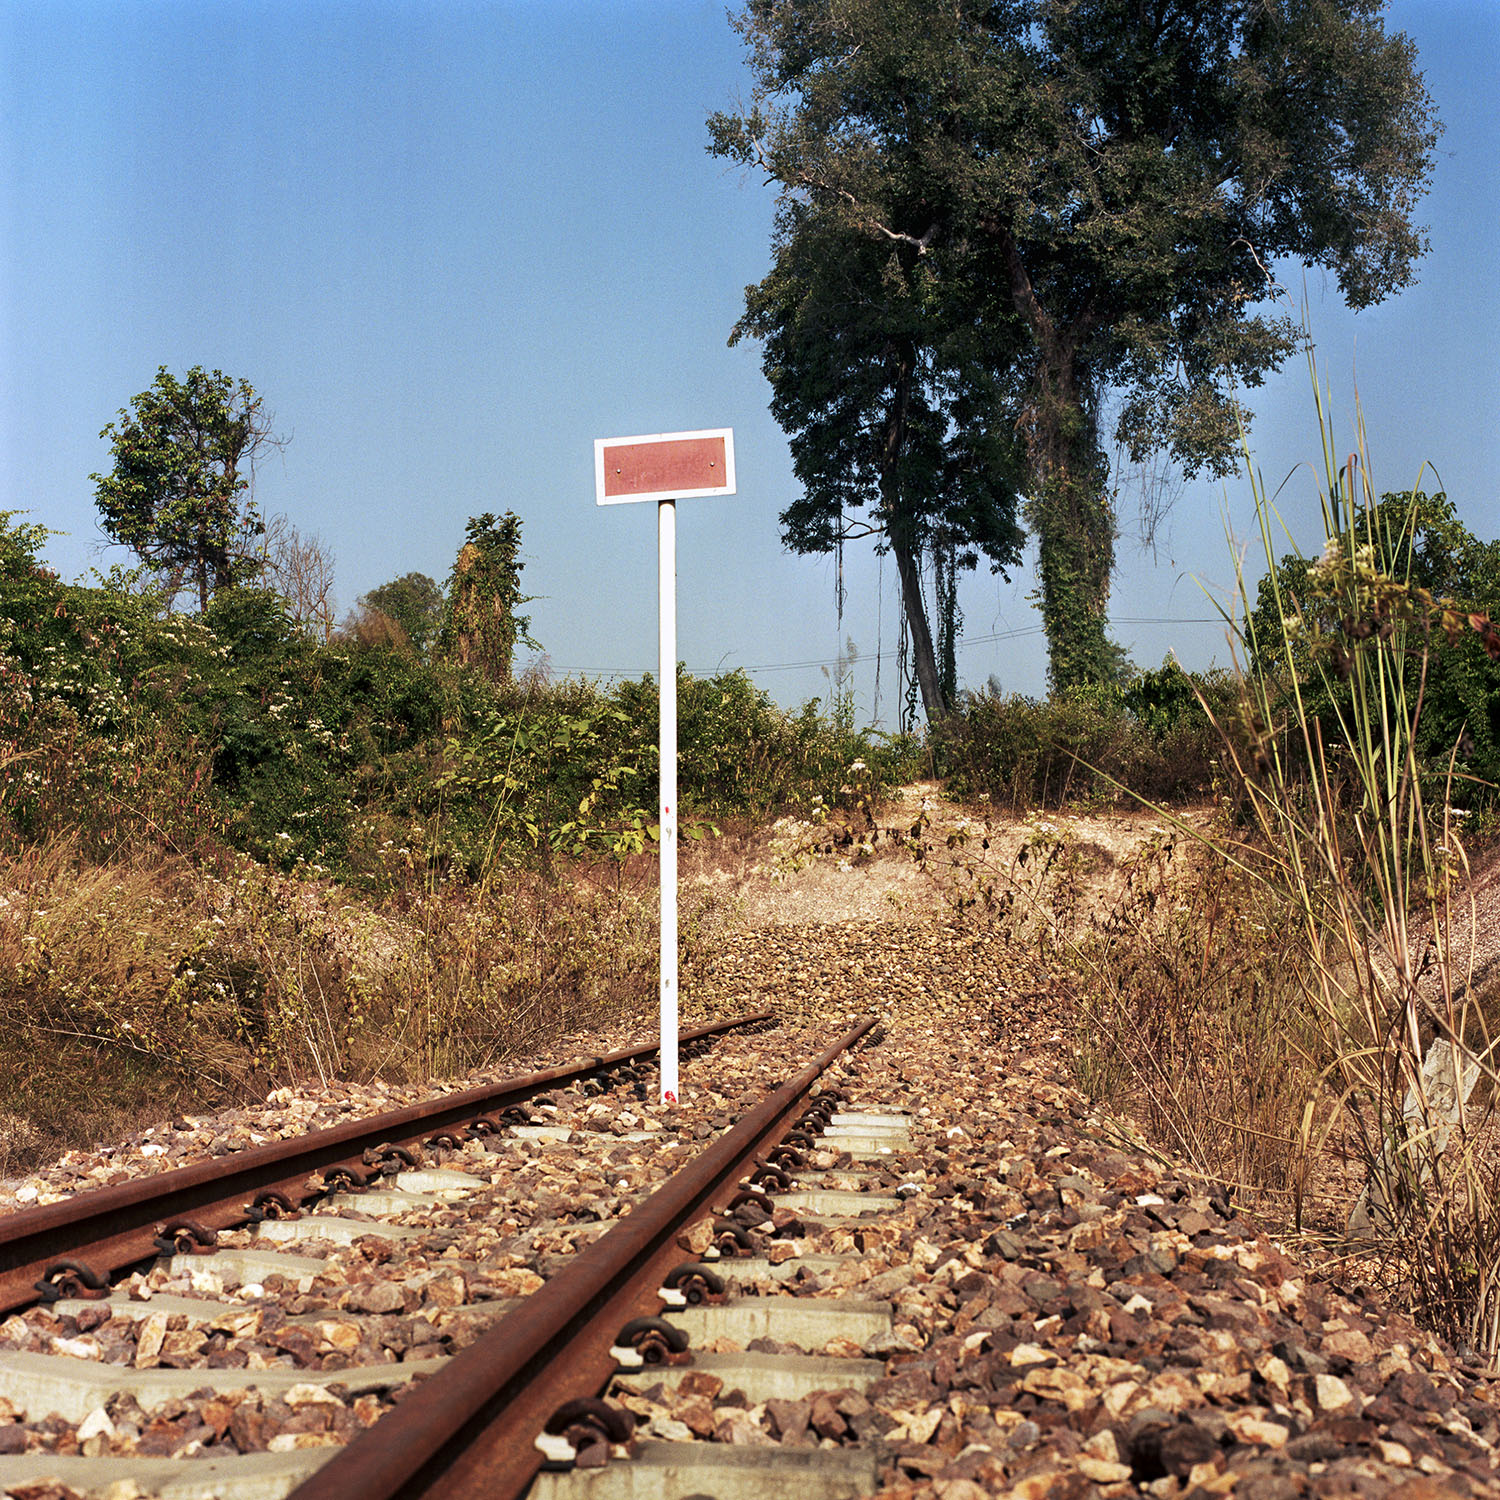 The one and only railway line in Laos. 2011.